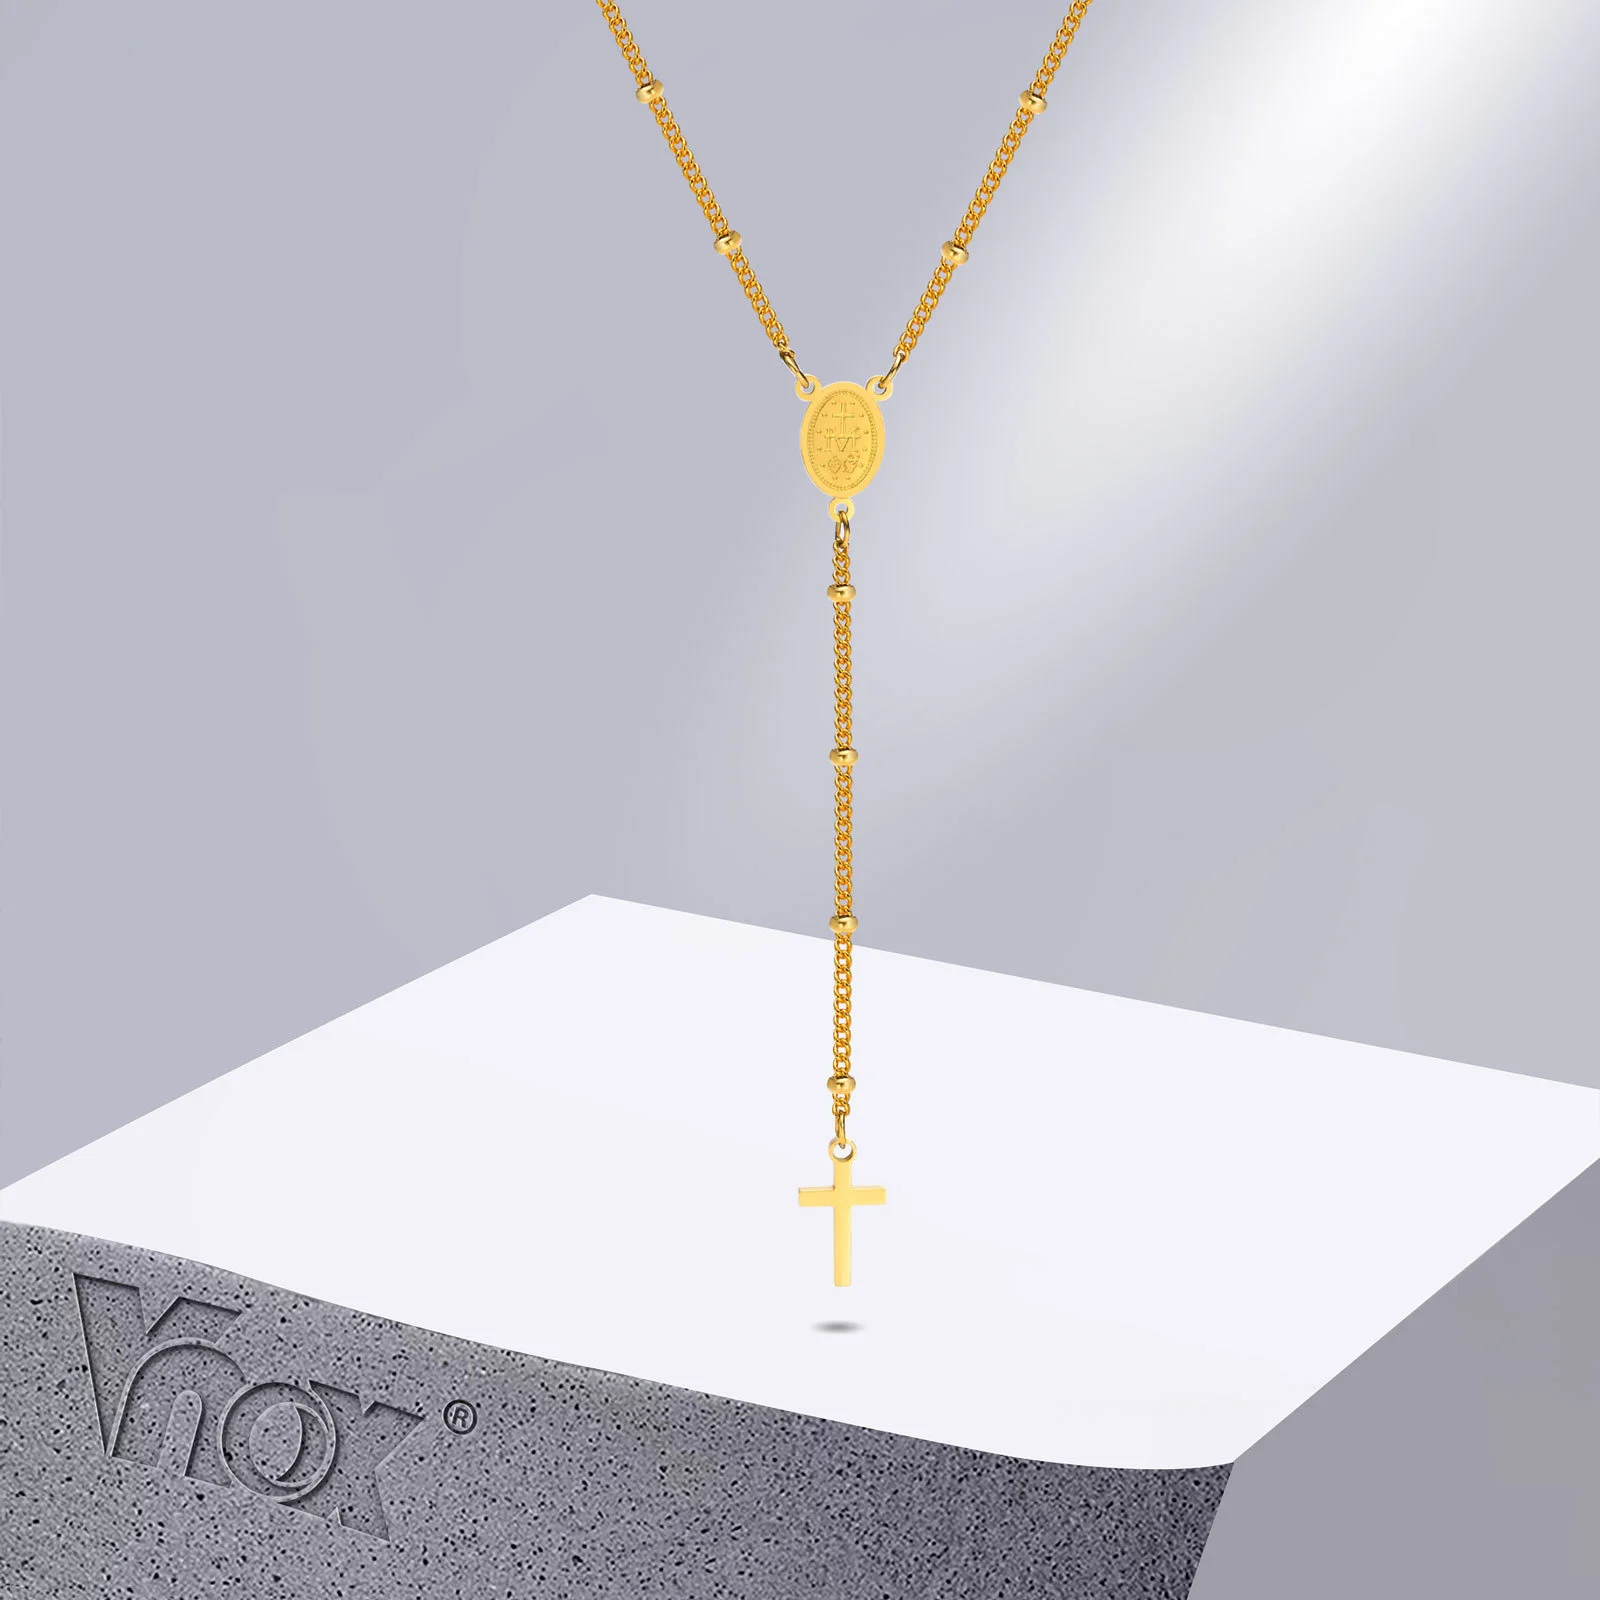 Vnox Gold Color Cross Rosary Beads Necklaces for Women, Stainless Steel Virgin Mary Medallion Satellite Chain Collar Gifts